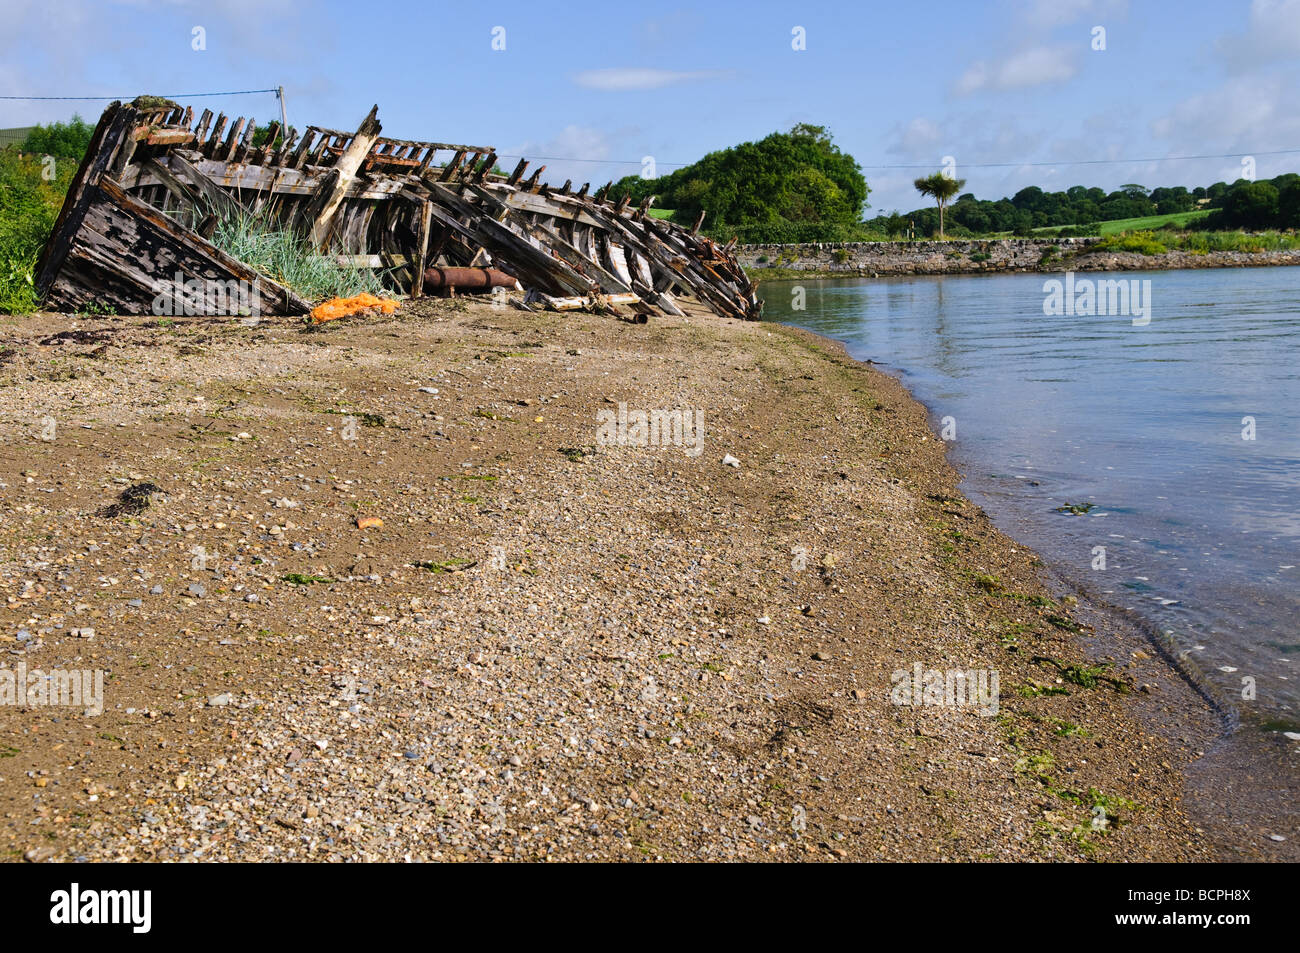 Shipwreck of a fishing boat on a beach in Wexford Ireland. Stock Photo